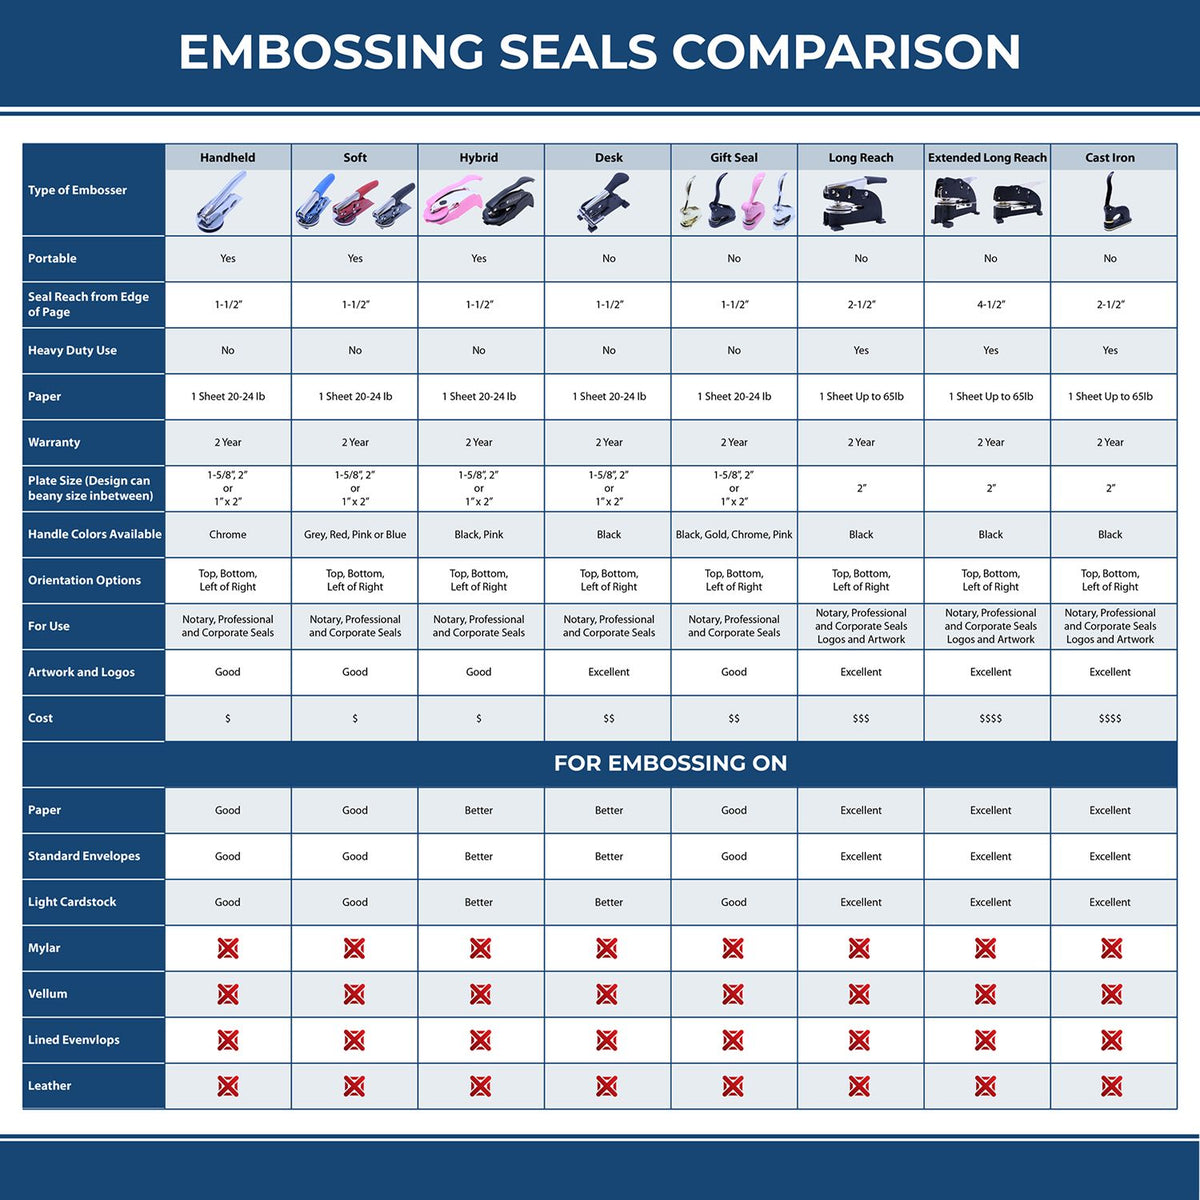 A comparison chart for the different types of mount models available for the Hybrid Nebraska Land Surveyor Seal